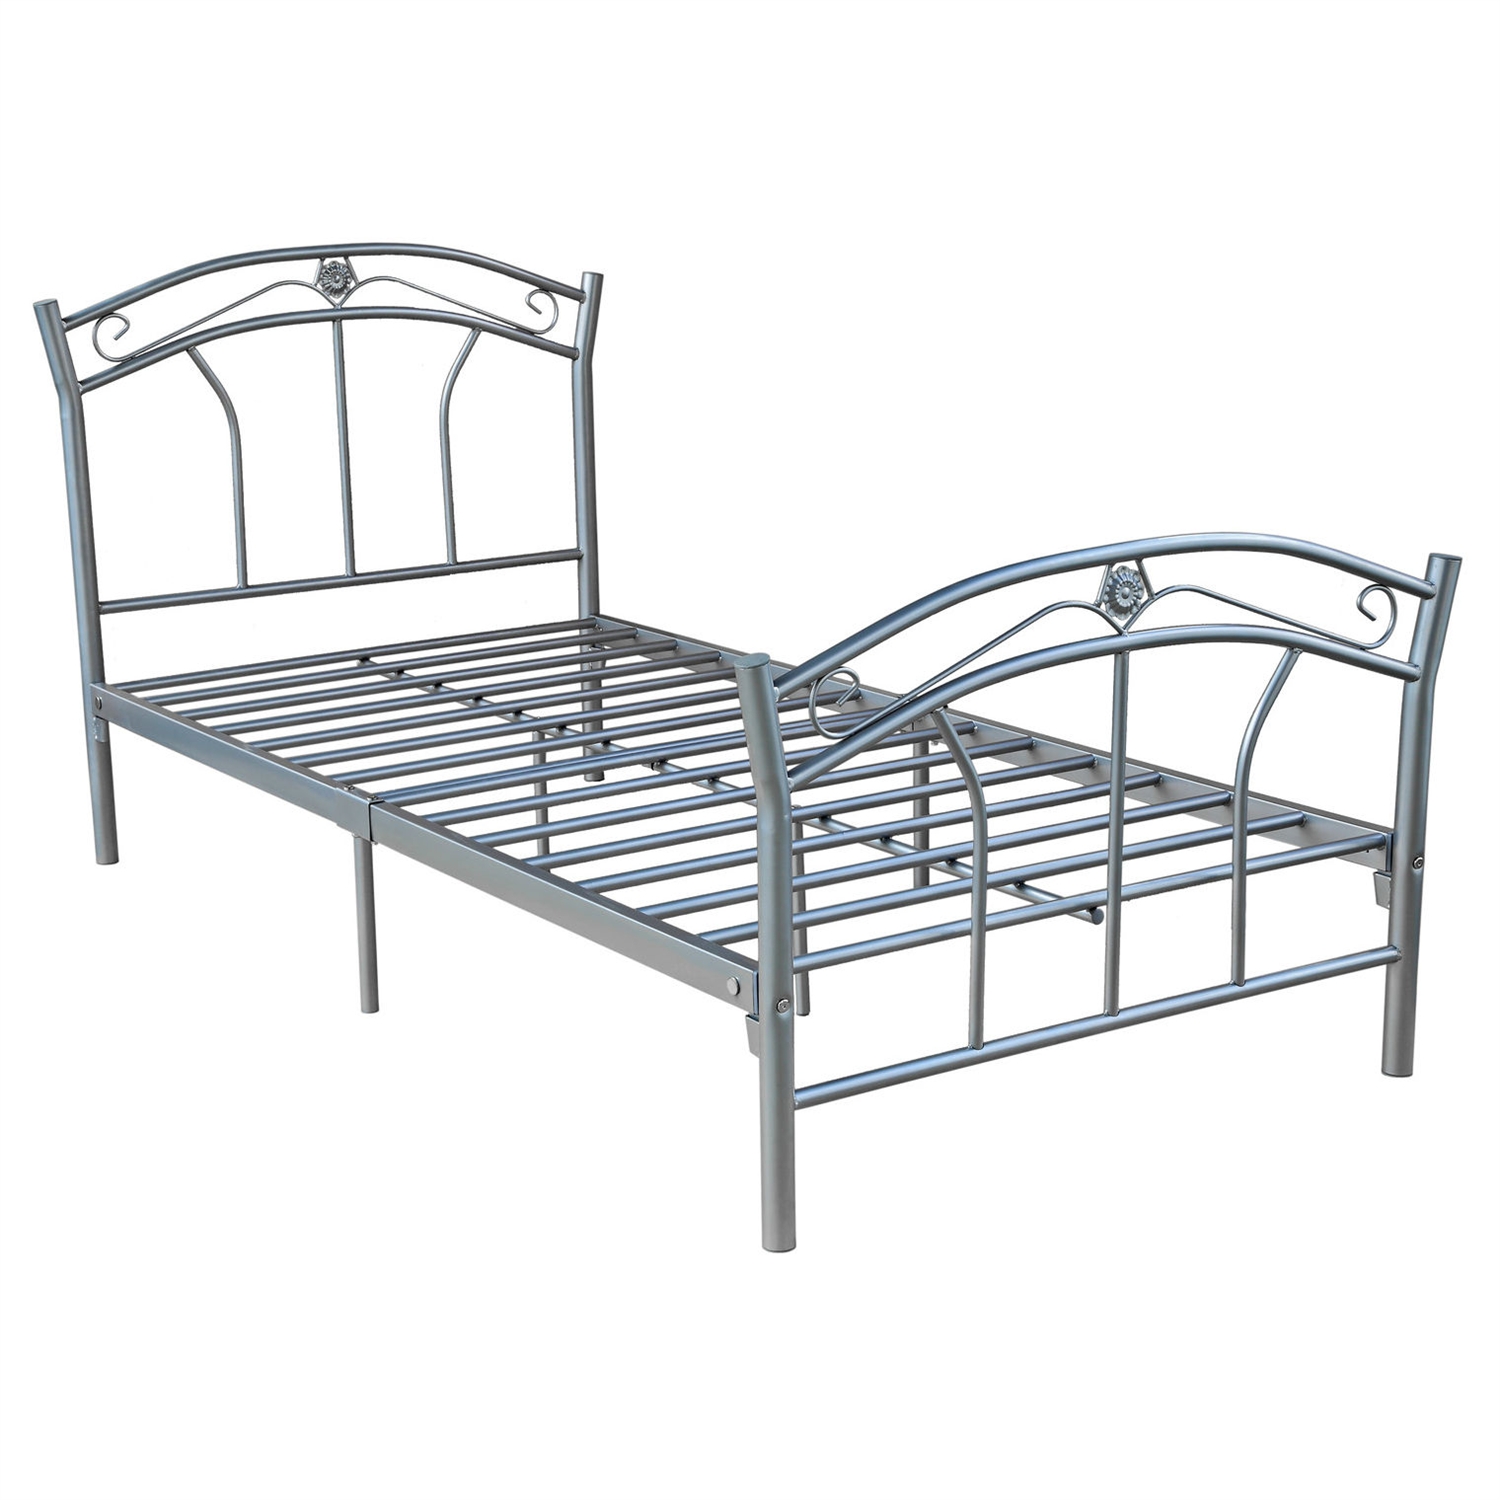 Twin size Silver Metal Platform Bed Frame with Headboard & Footboard